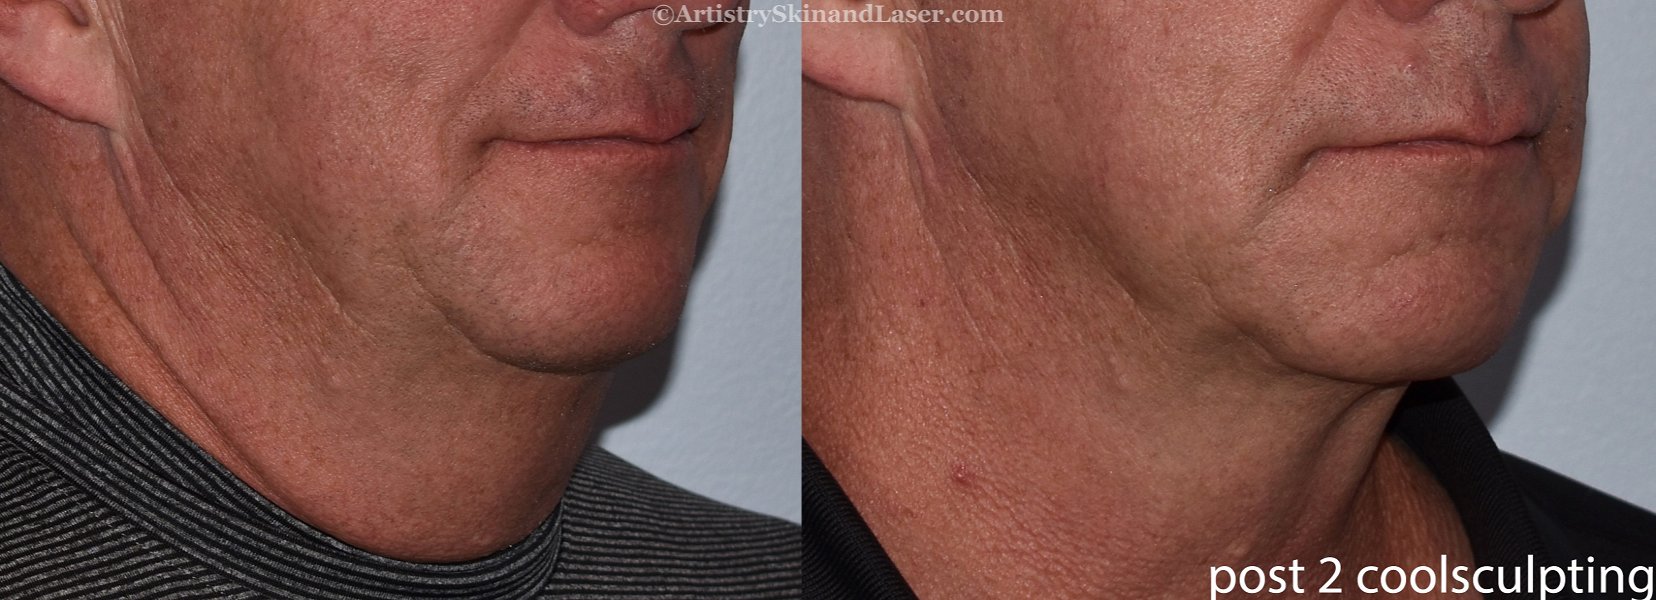 Man's before and after Coolsculpting chin treatment at Artistry Skin & Laser.